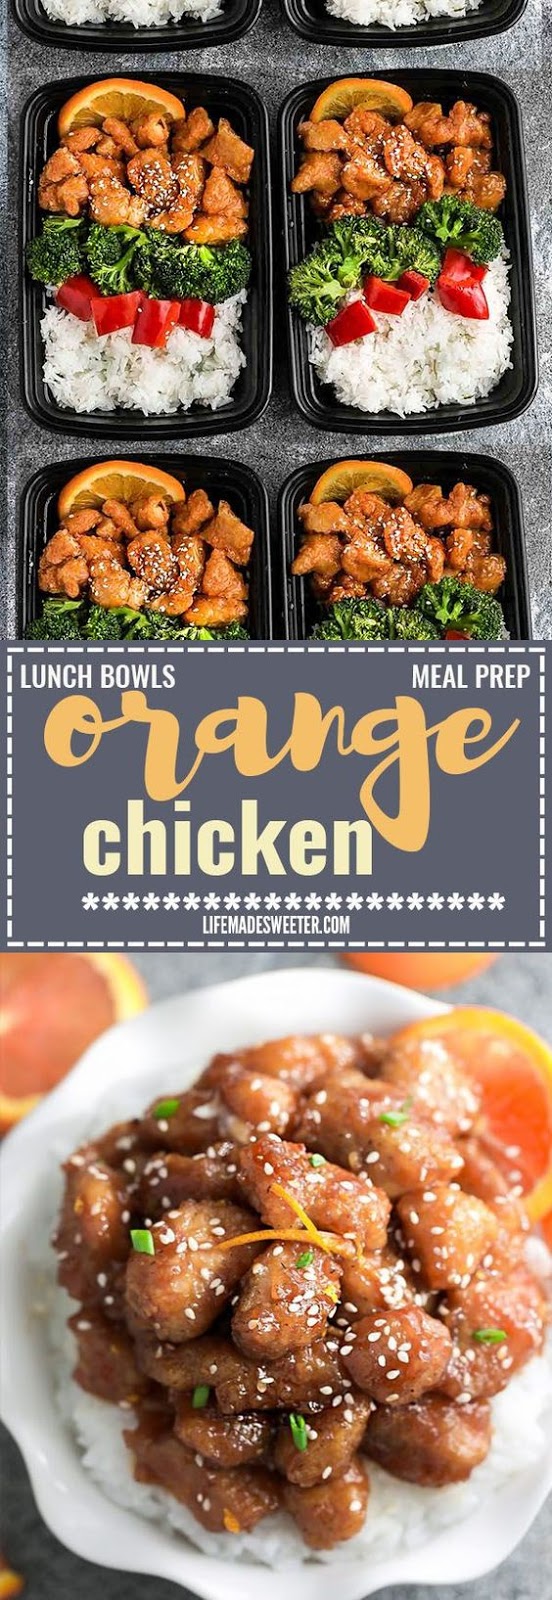 Slow Cooker Orange Chicken Meal Prep Lunch Bowls - coated in a citrus sweet & savory sauce that is even better than your local takeout restaurant! Best of all, it's full of authentic flavors and super easy to make with just 15 minutes of prep time. Skip that takeout menu! This is so much better and healthier! Weekly meal prep for the week and leftovers are great for lunch bowls for work or school